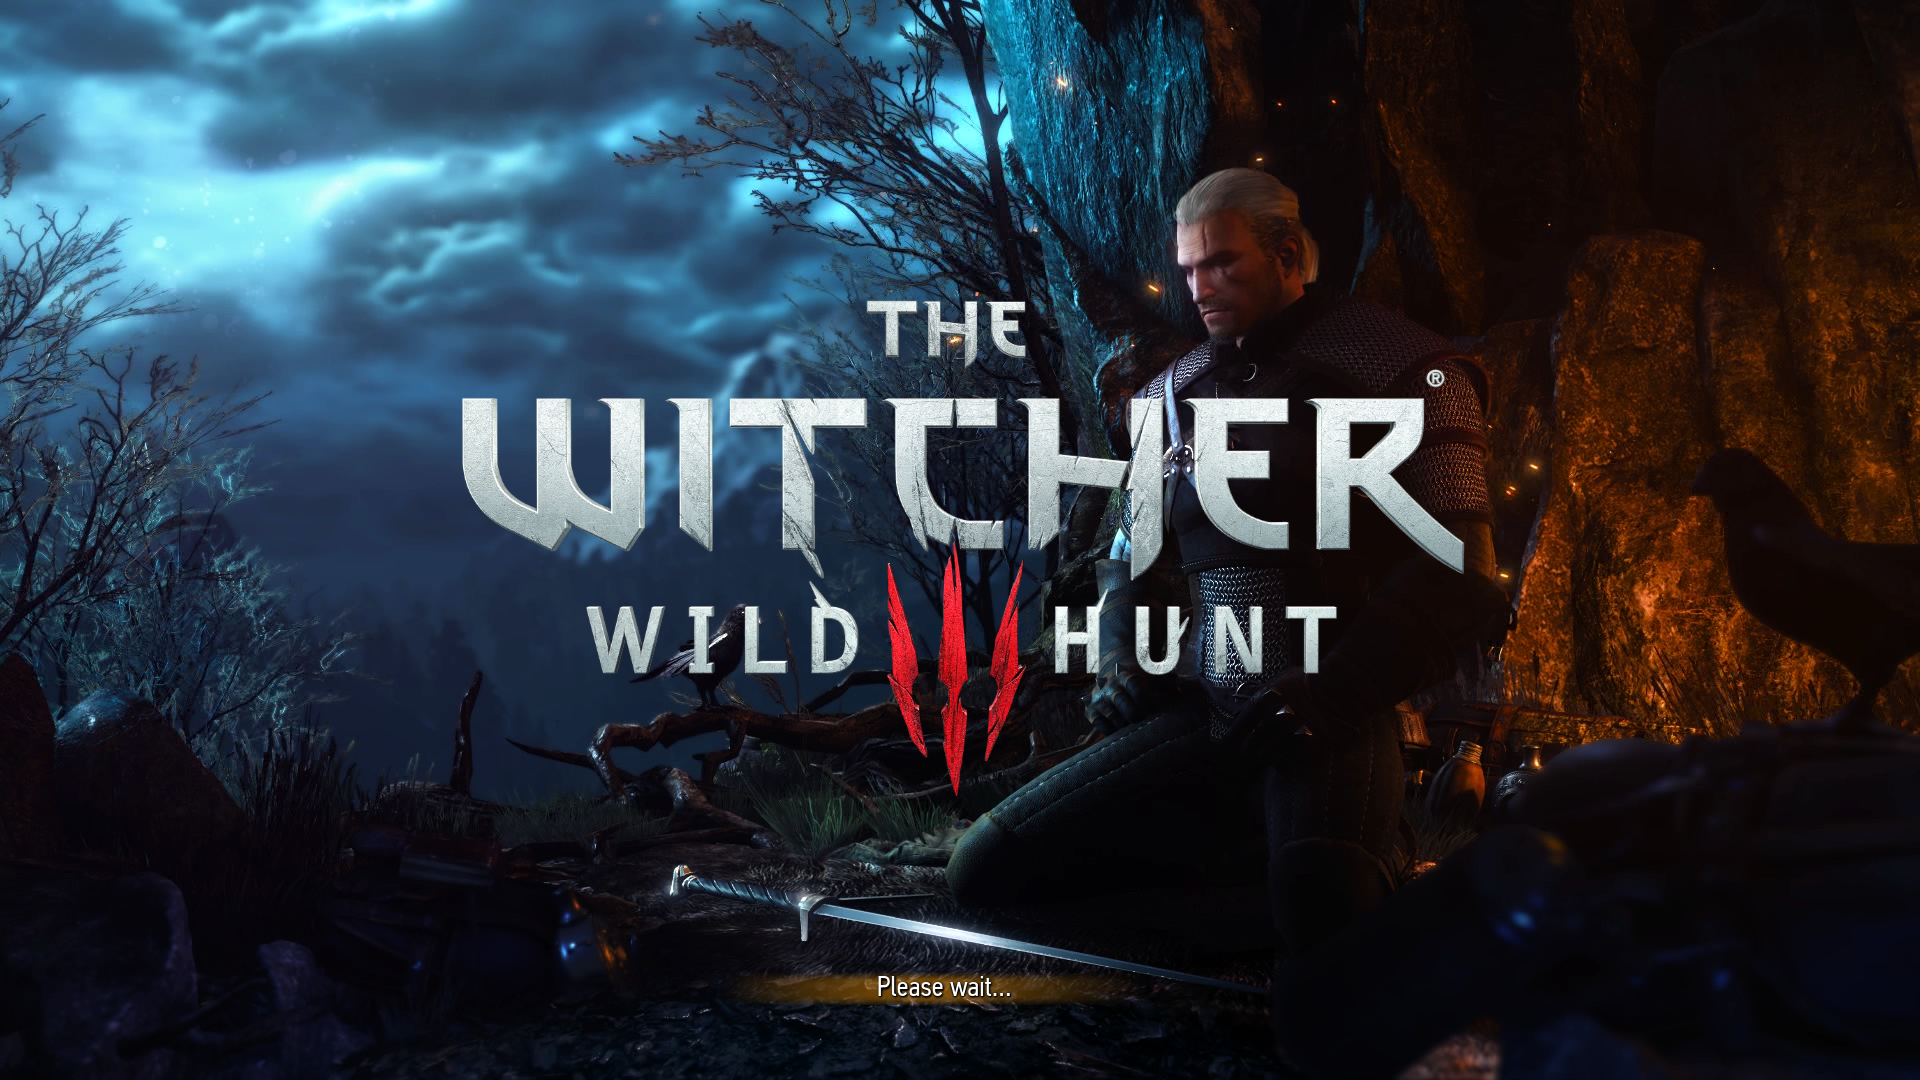 brynne kelly recommends witcher 3 oculus rift pic